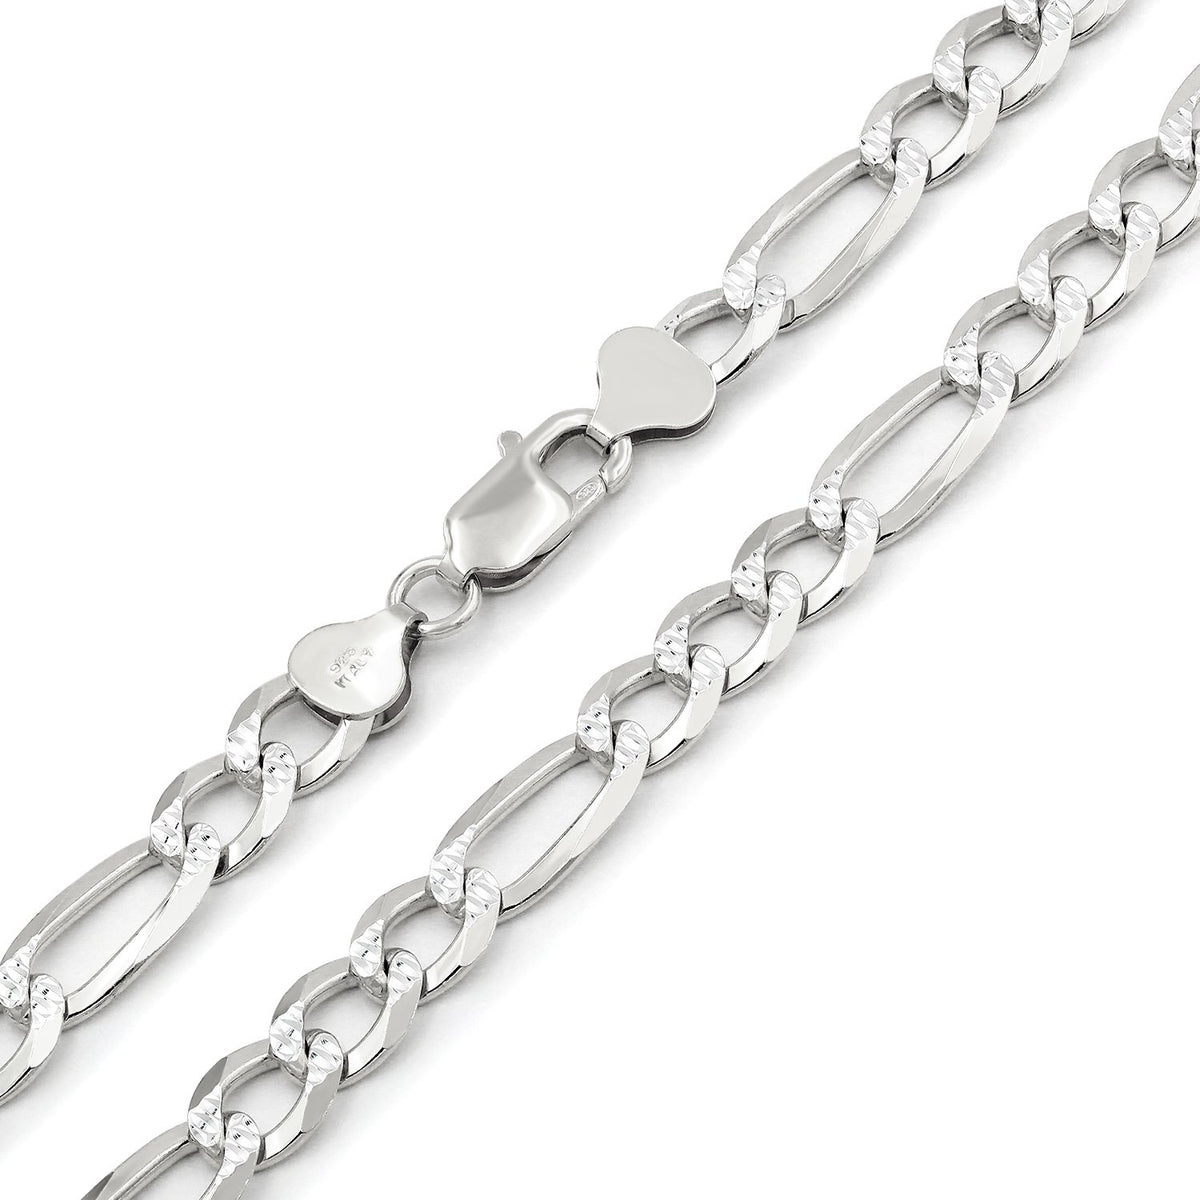 Italian Solid Sterling Silver Figaro Link Chain Necklace 925 Silver Chain  UNISEX